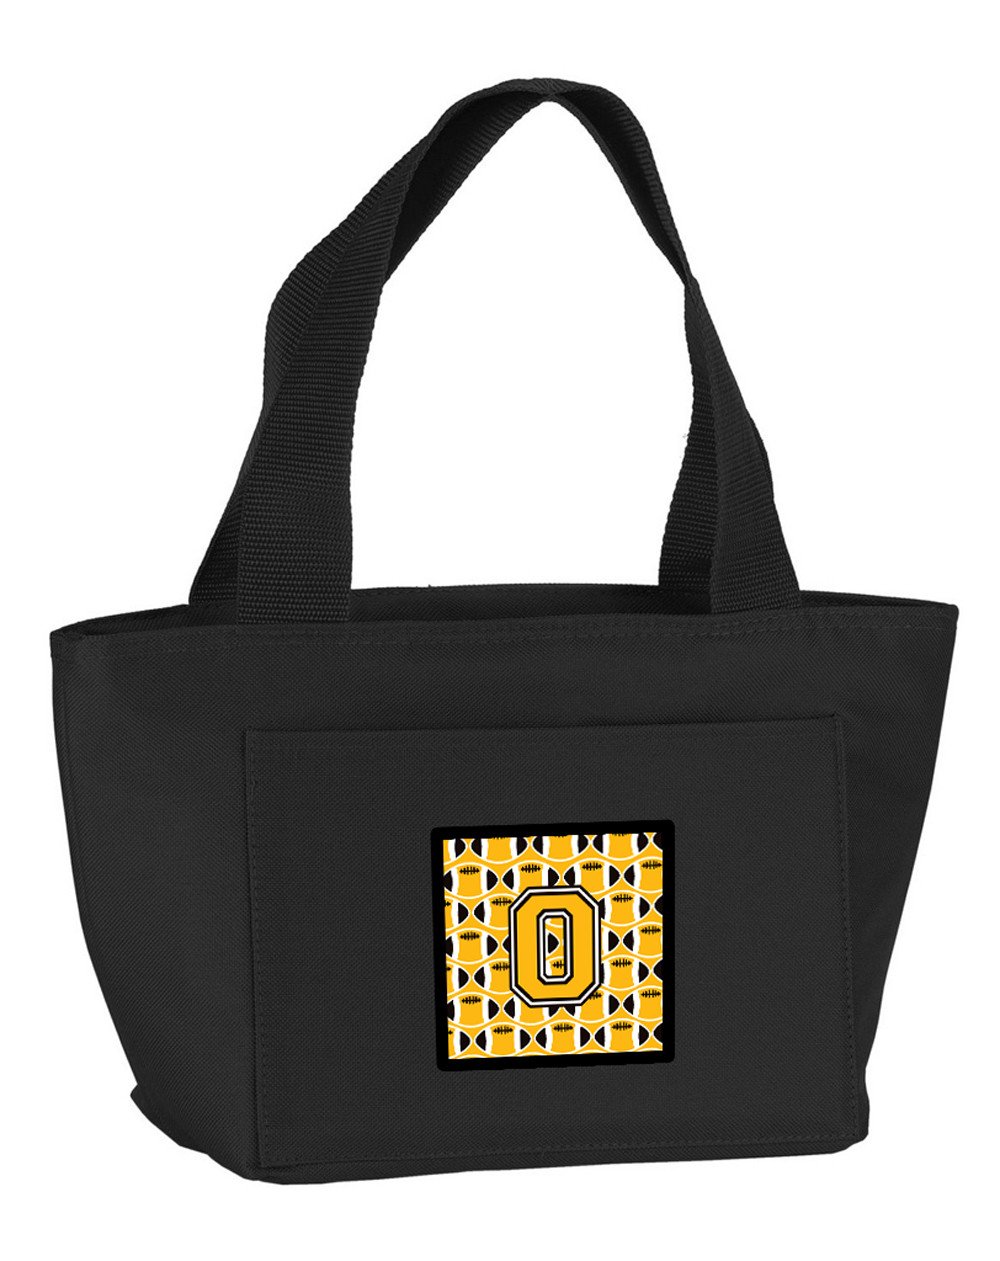 Letter O Football Black, Old Gold and White Lunch Bag CJ1080-OBK-8808 by Caroline's Treasures